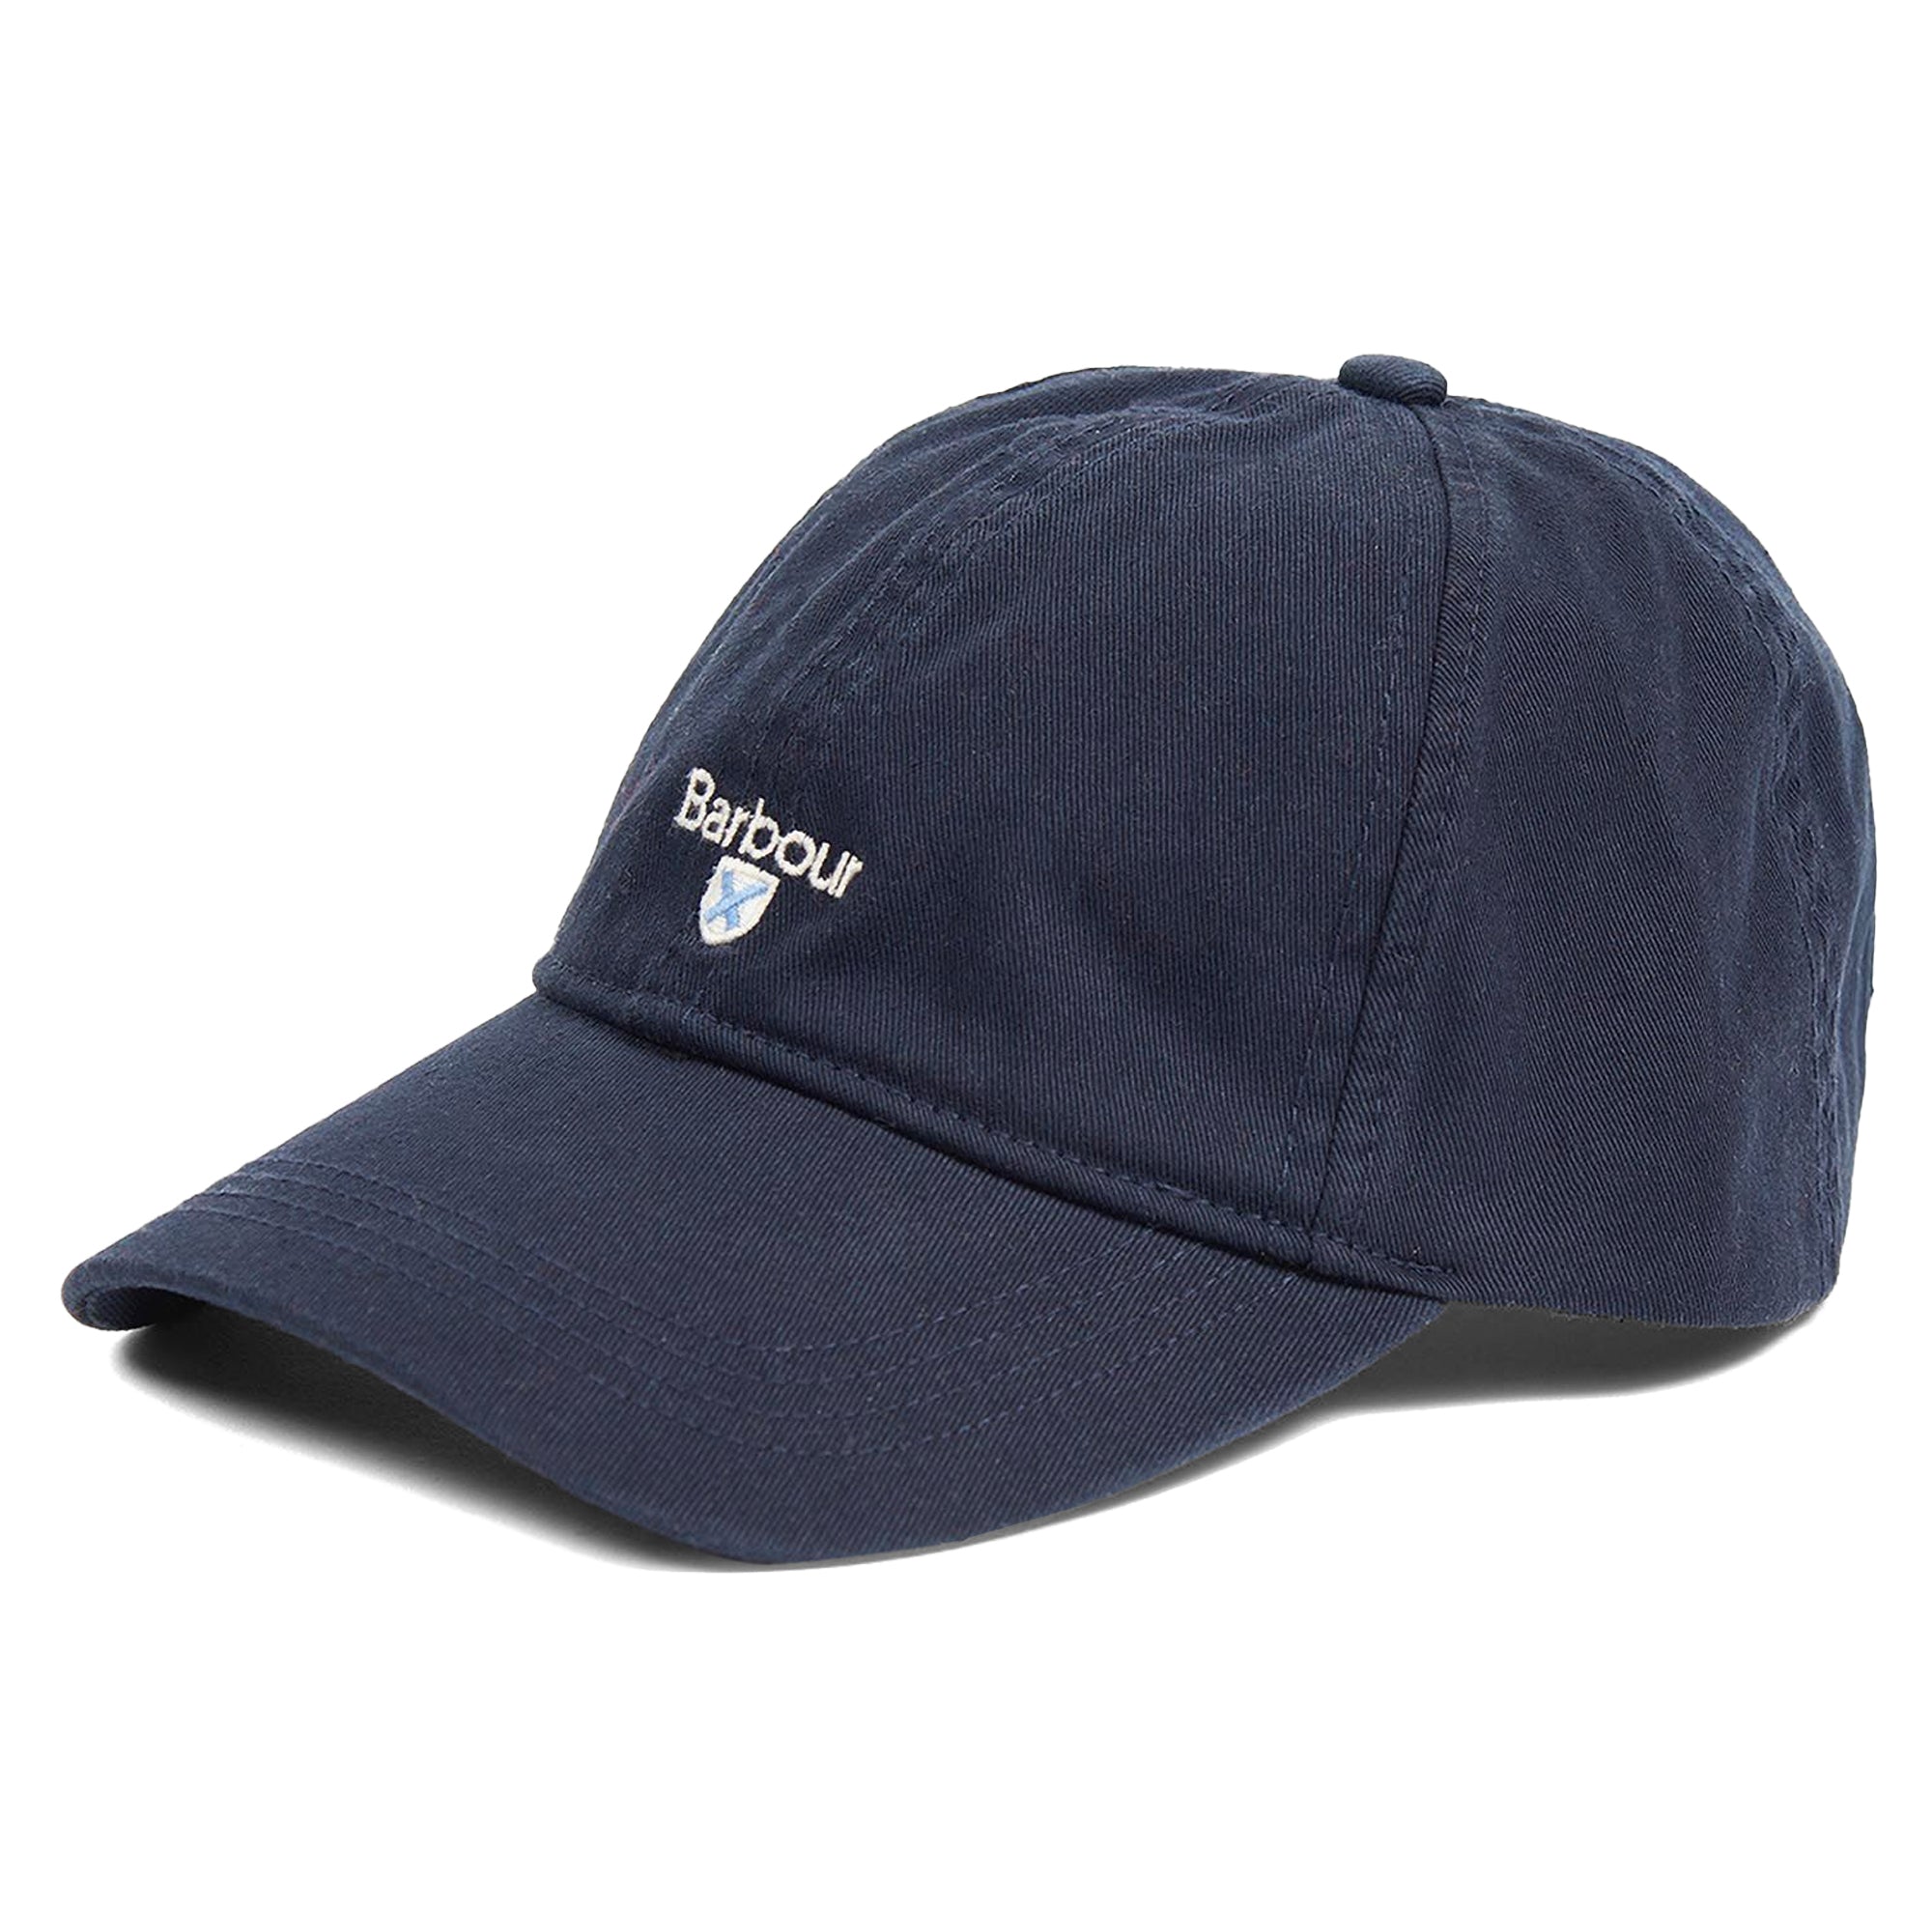 Barbour Cascade Washed Sports Cap - Navy